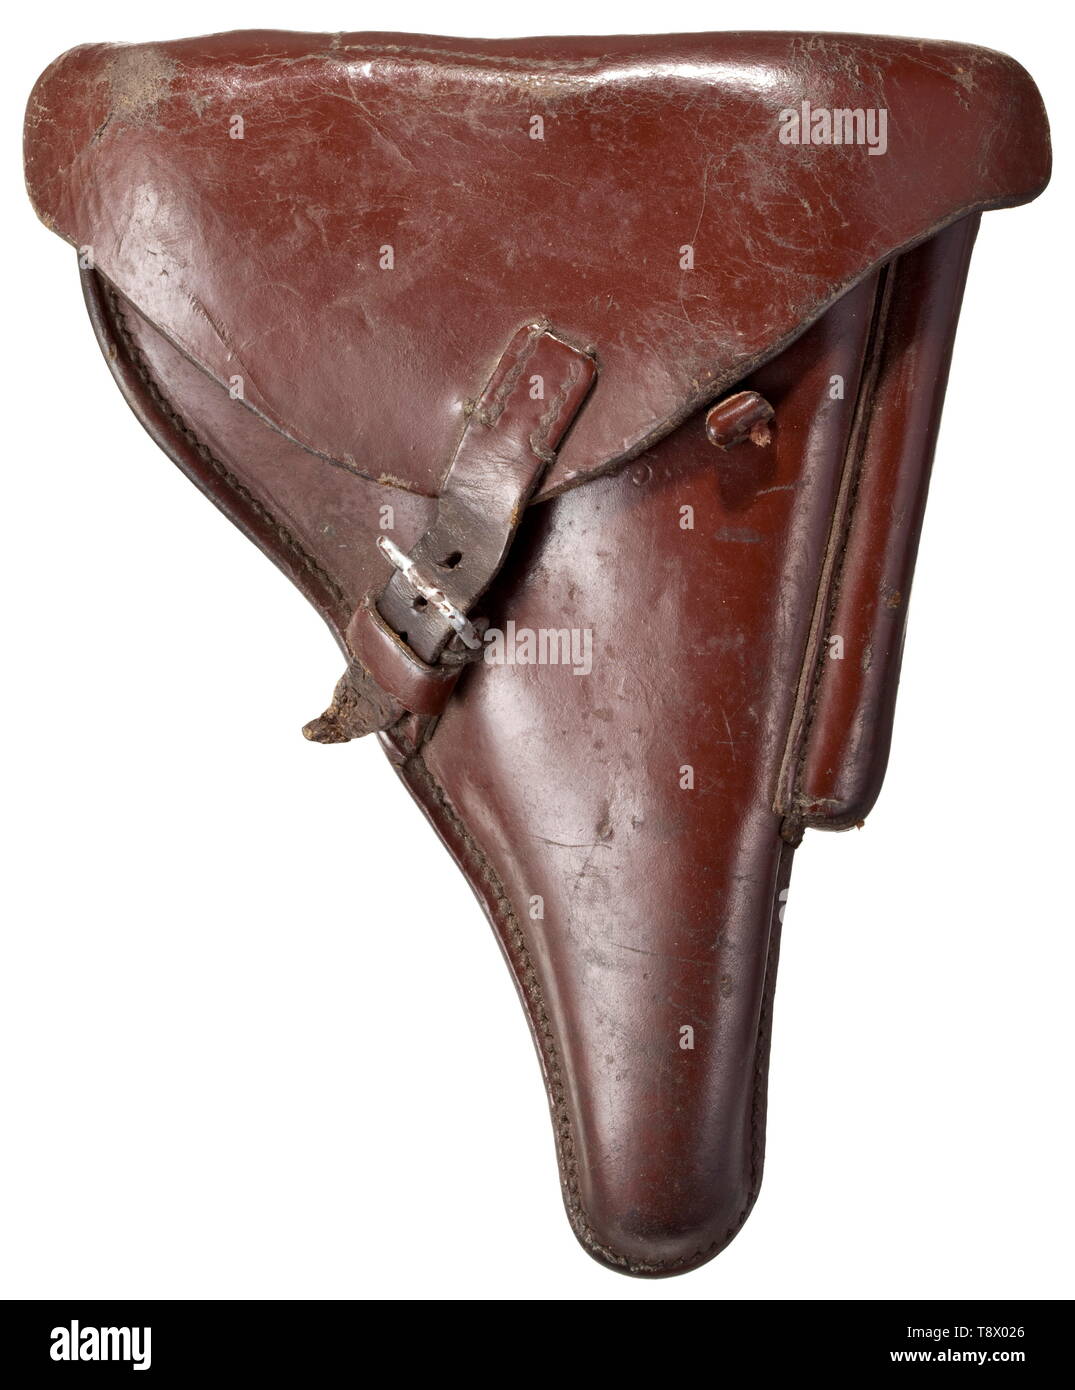 A holster for the P.08 manufactory 'Carl Heinichen / Dresden / 1935', police type of the weapon S/N 9728 in front on the body under the cover Sturdy, brown cowhide, re-dyed in the past. Key slot with key, galvanised brass coated. Prong clasp. Stitching and pull strap in order. historic, historical, 20th century, Additional-Rights-Clearance-Info-Not-Available Stock Photo